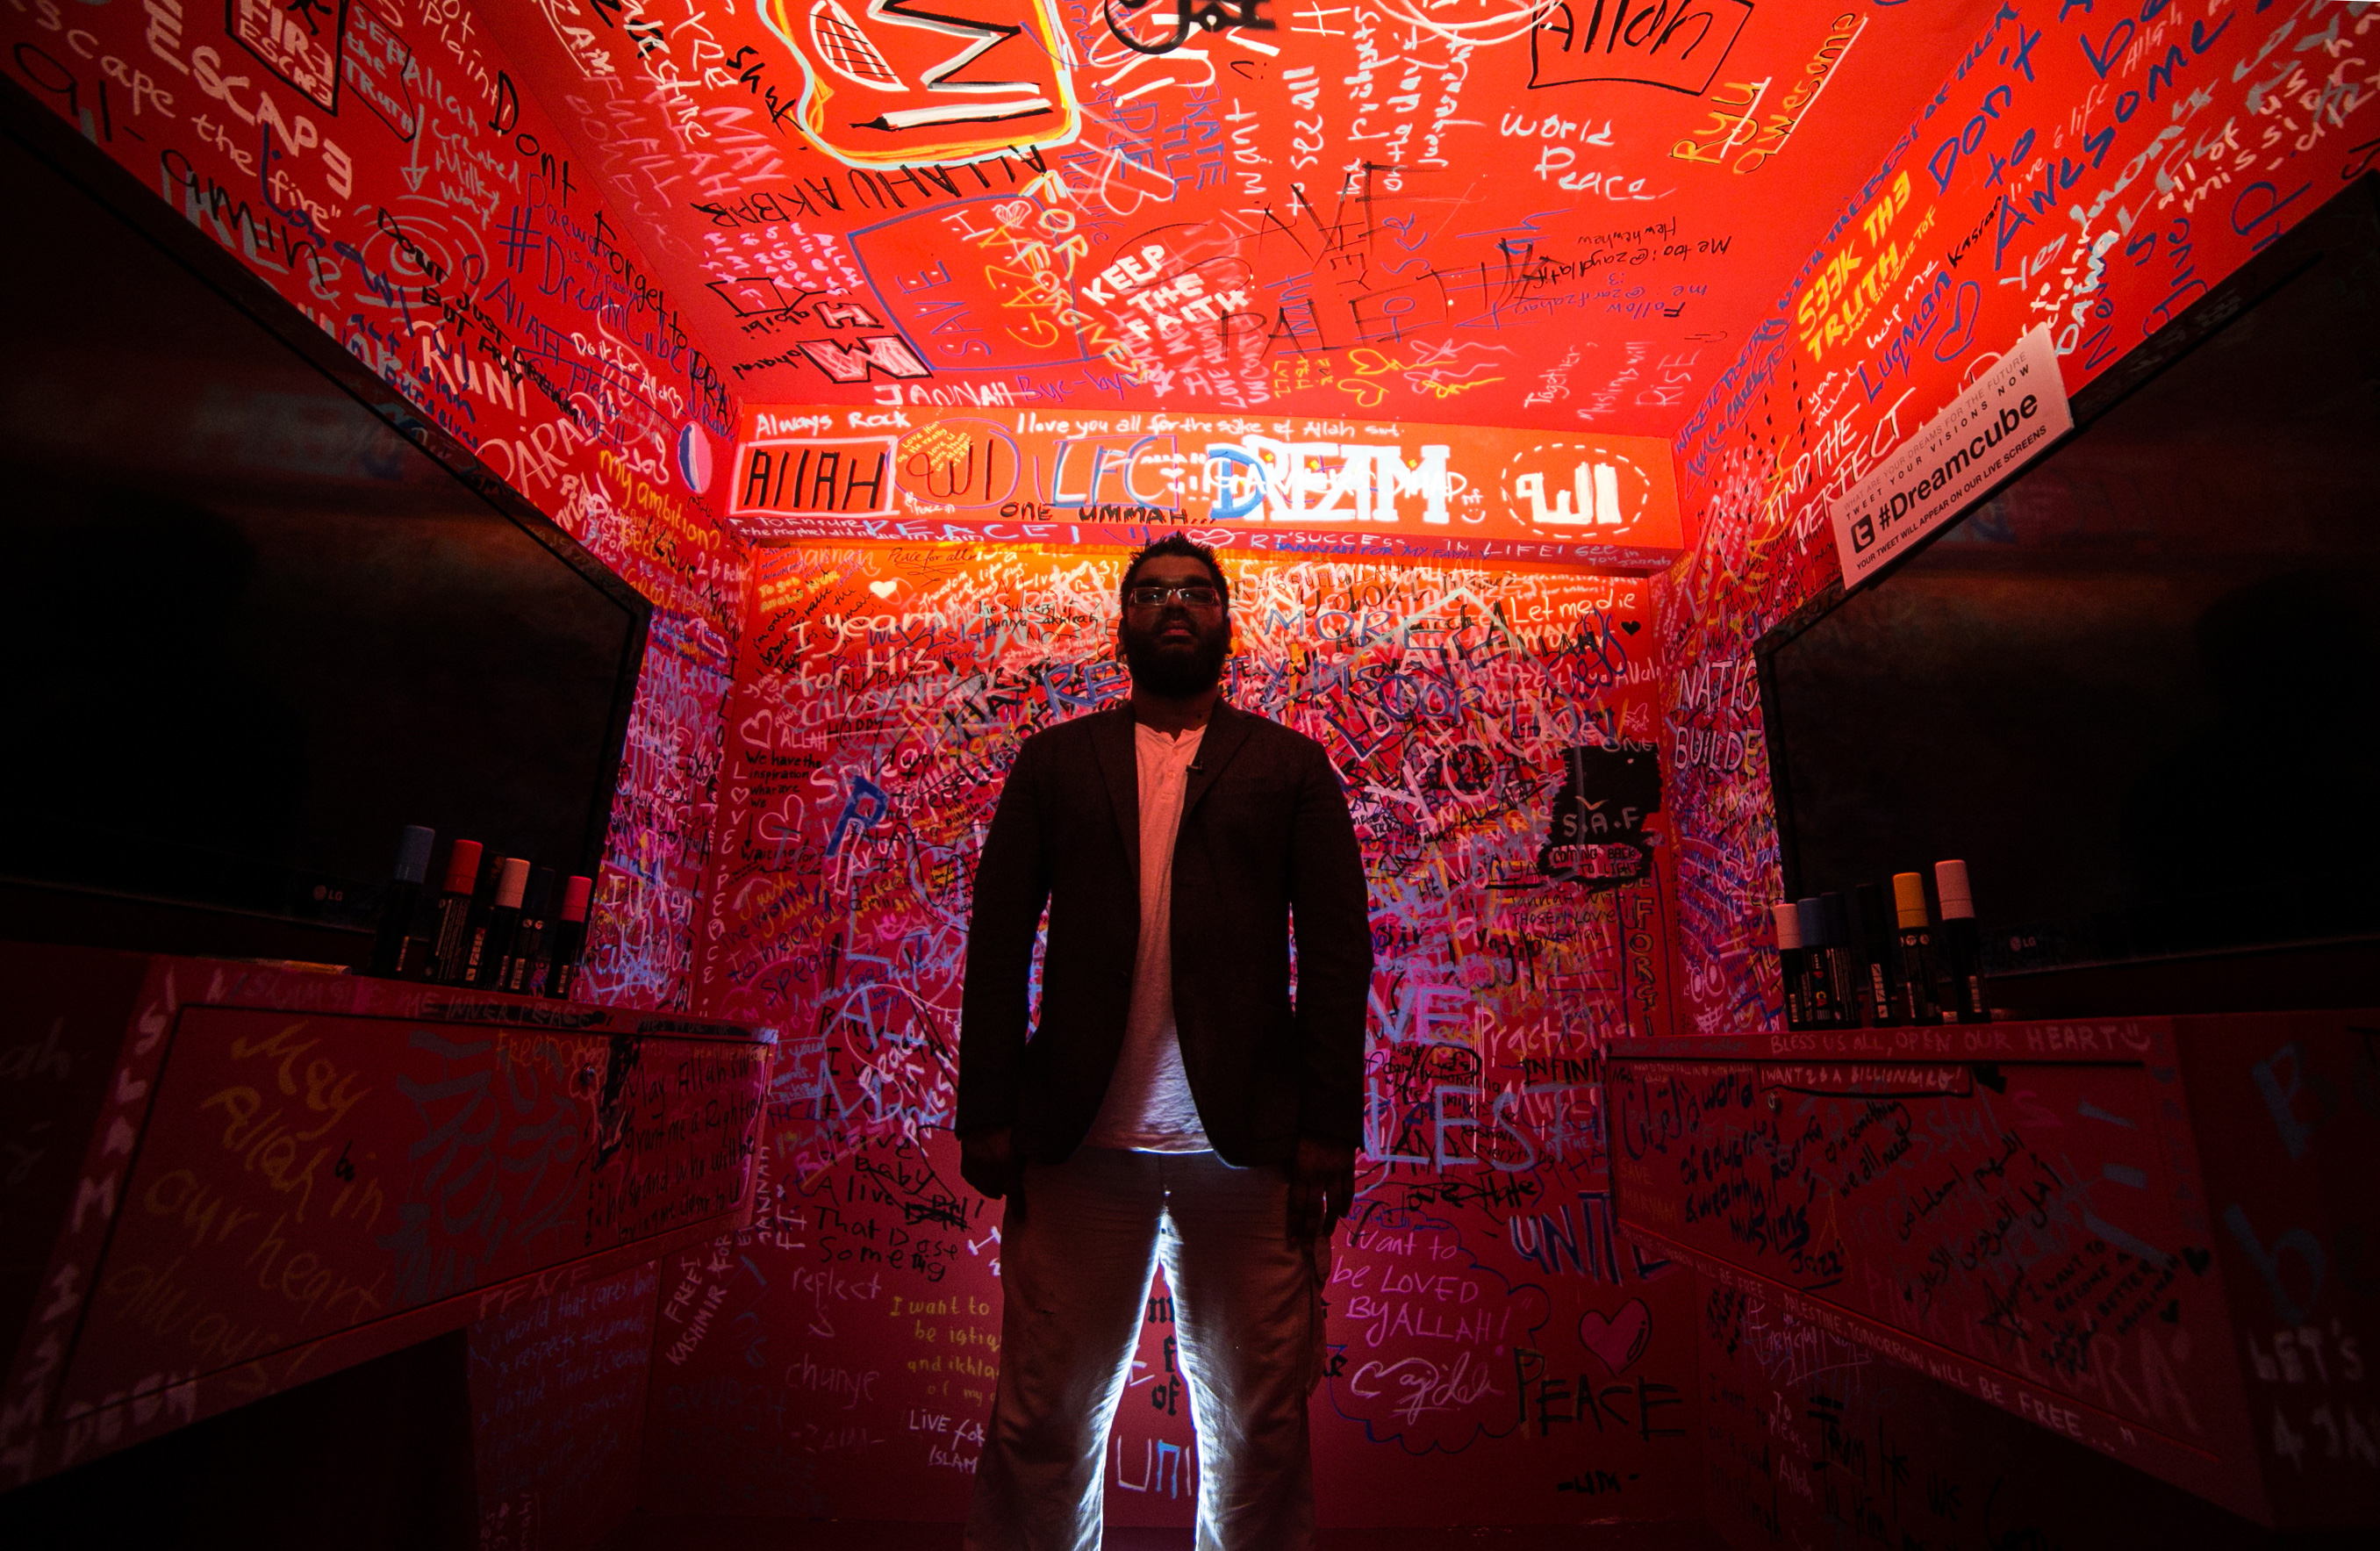 The Hubb was created by Birmingham-based global street artist Mohammed Ali MBE